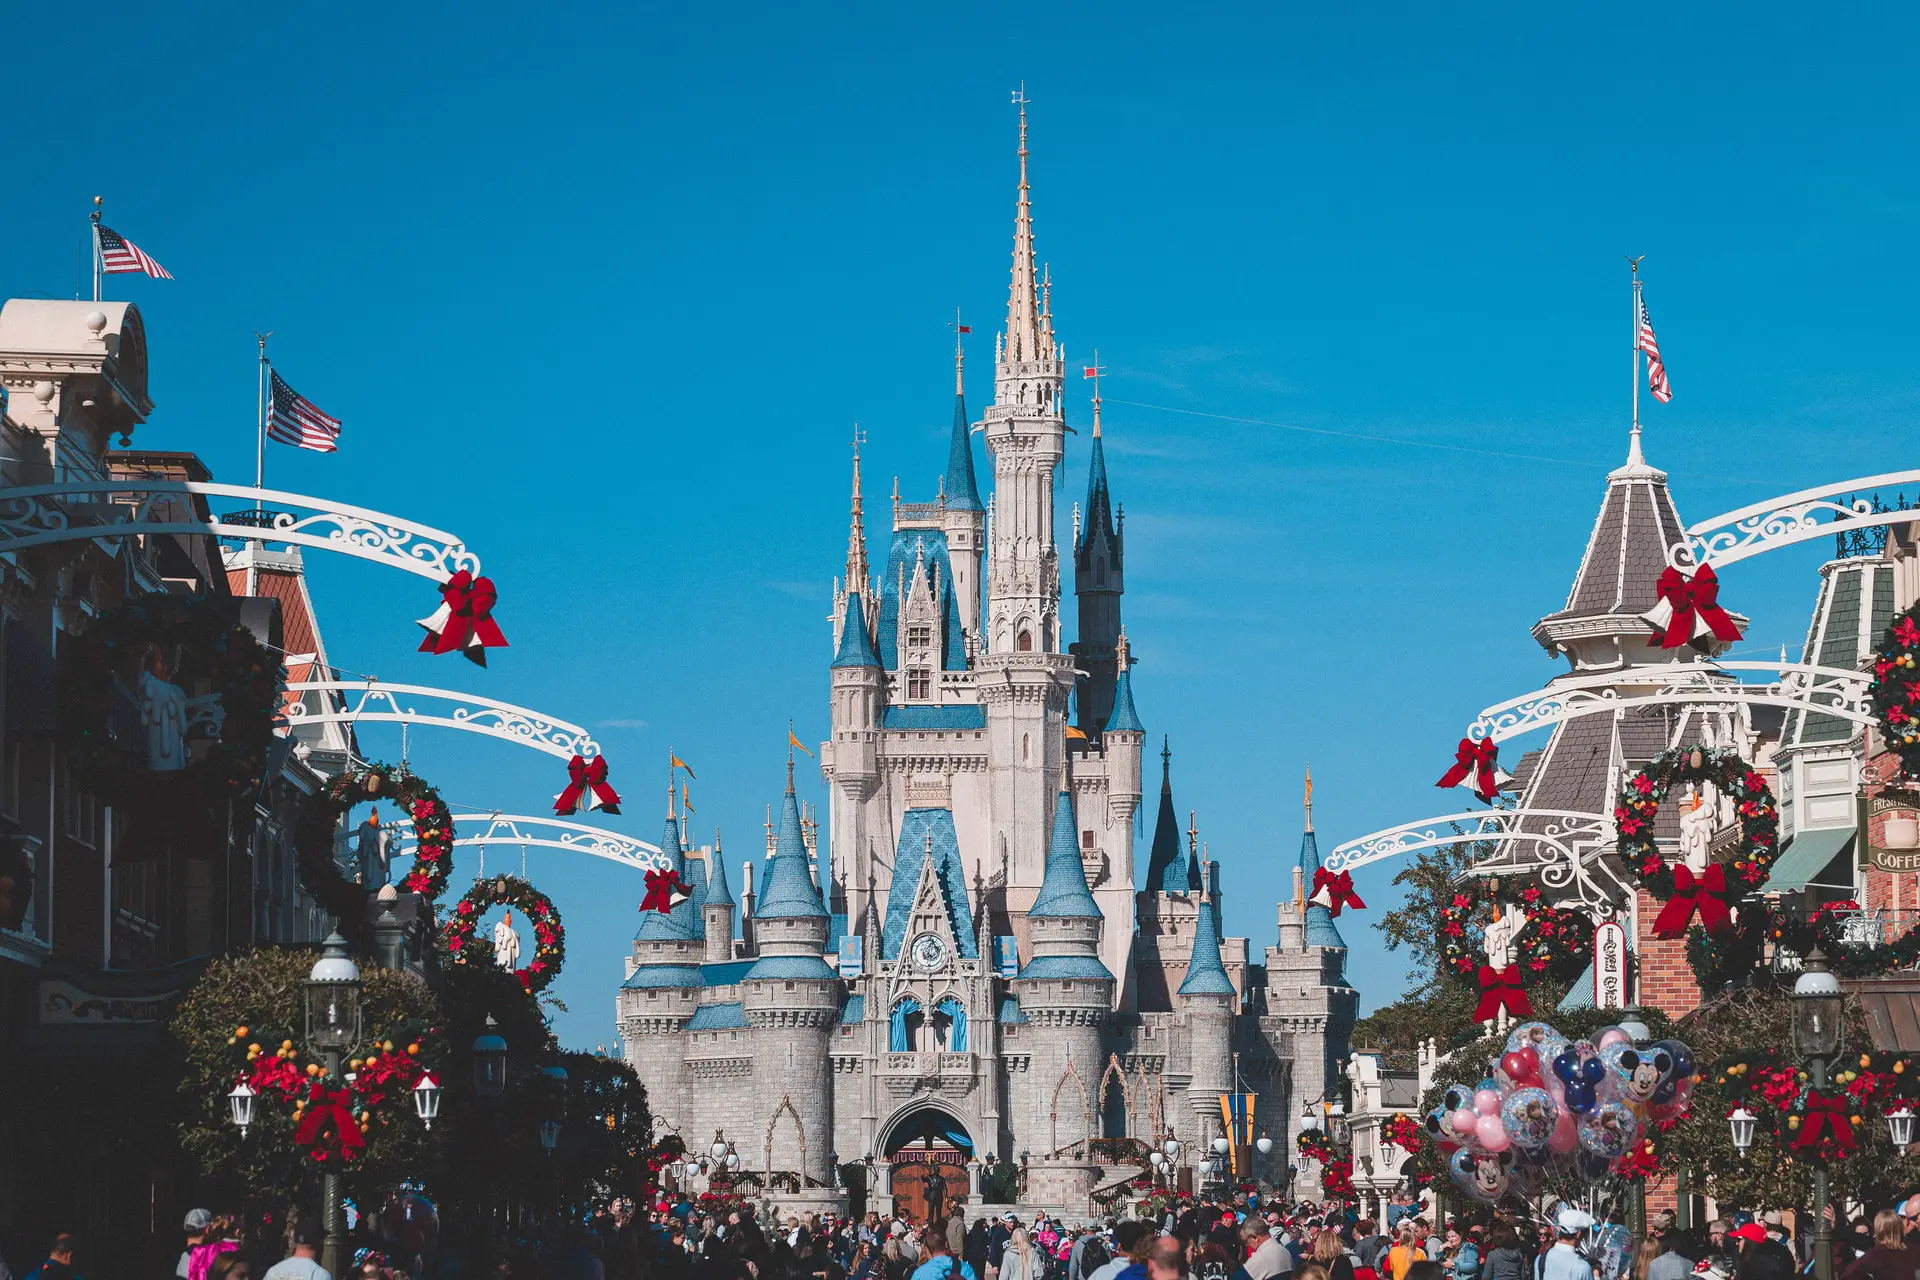 Snap and Disney Partner to Develop an AR Cinderella Castle Mural at Disney World